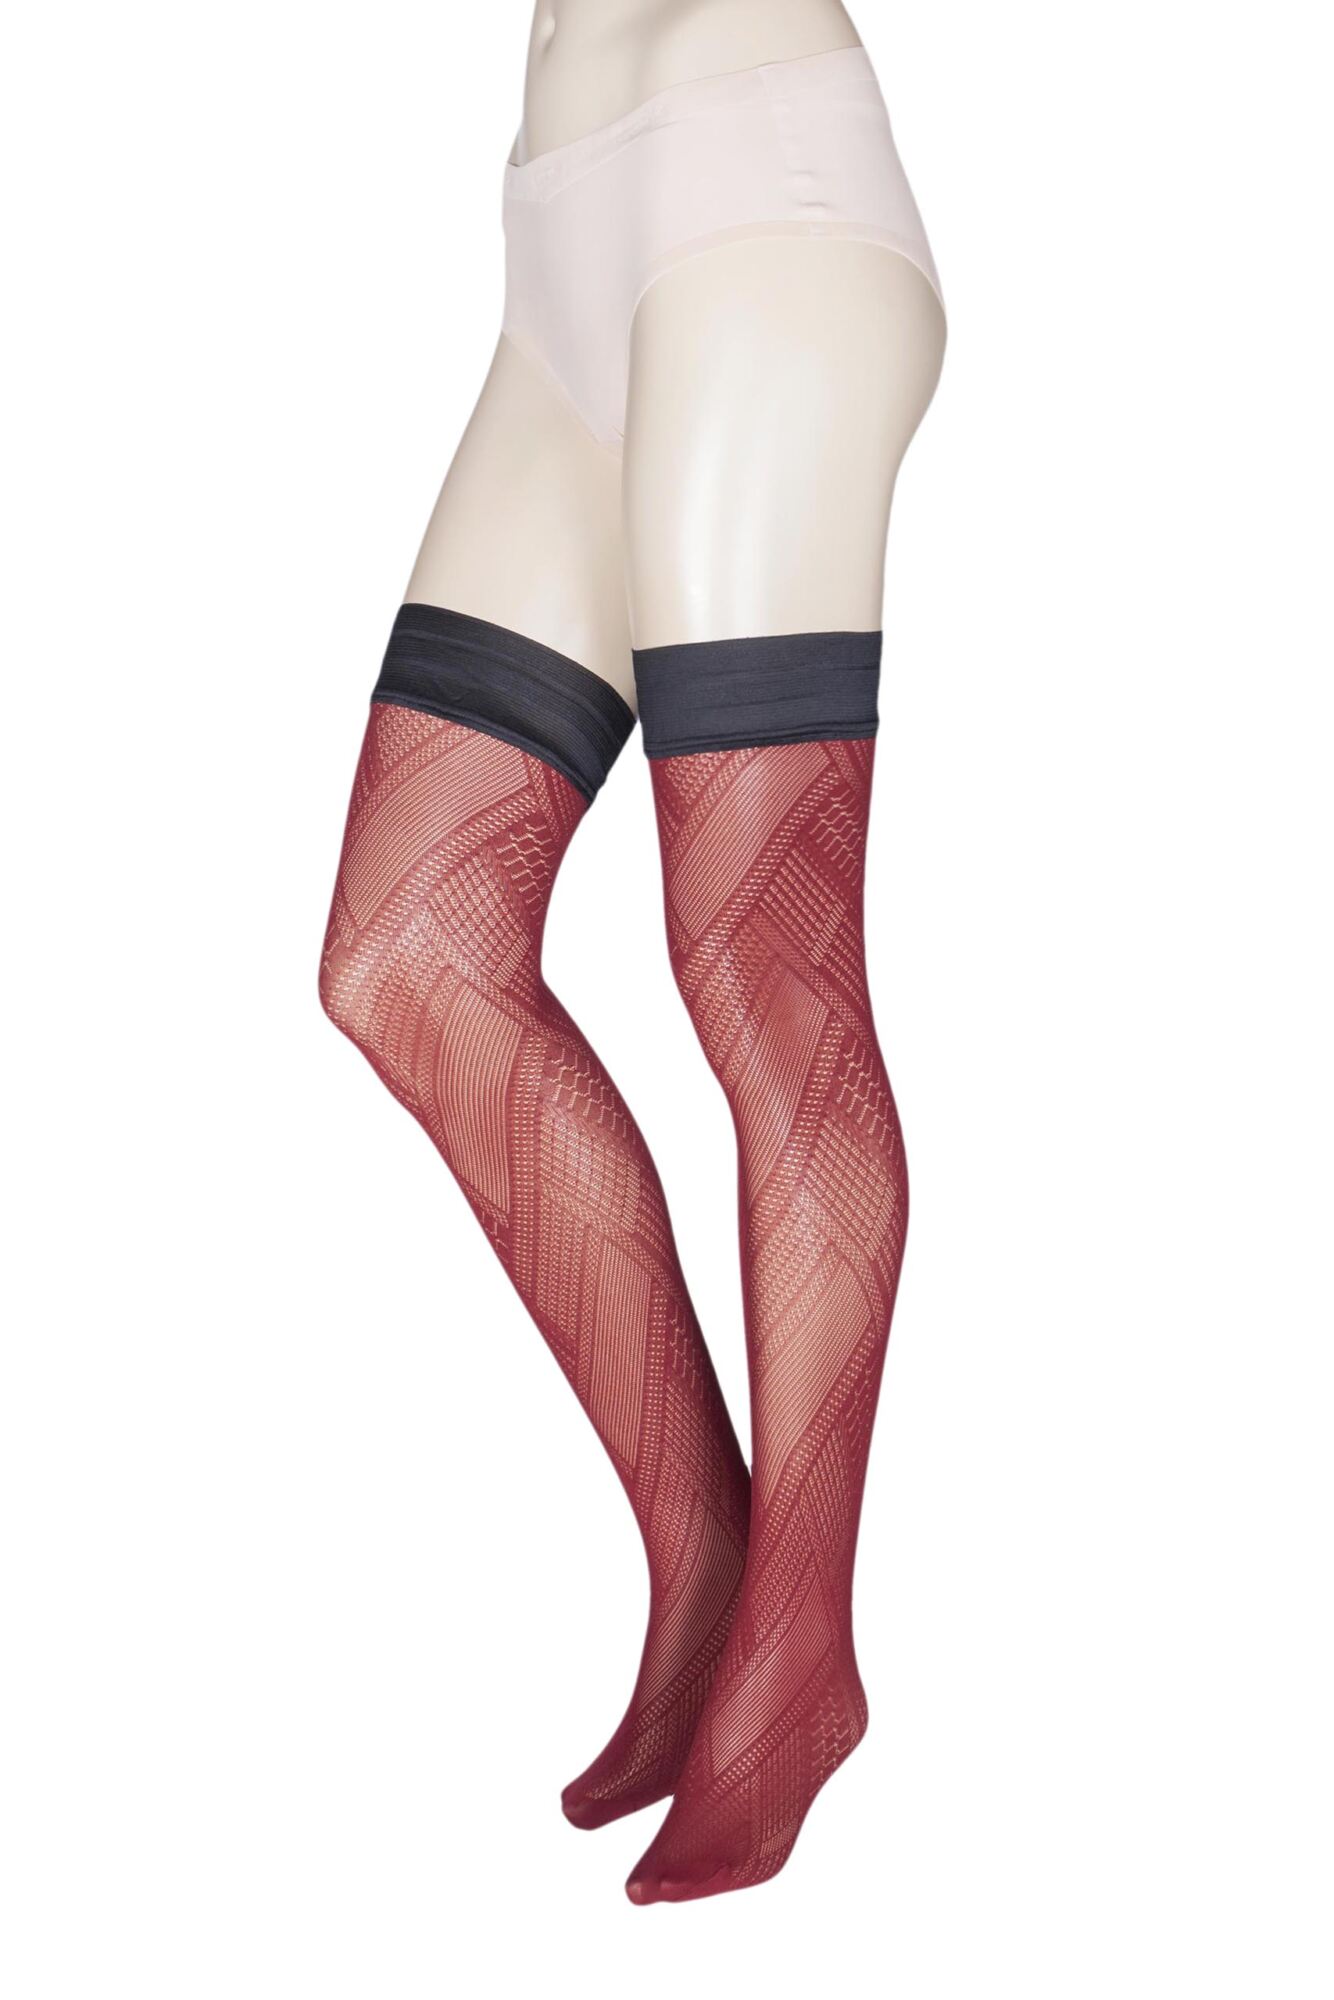 1 Pair Soave Patterned Opaque Hold Ups Ladies - Trasparenze